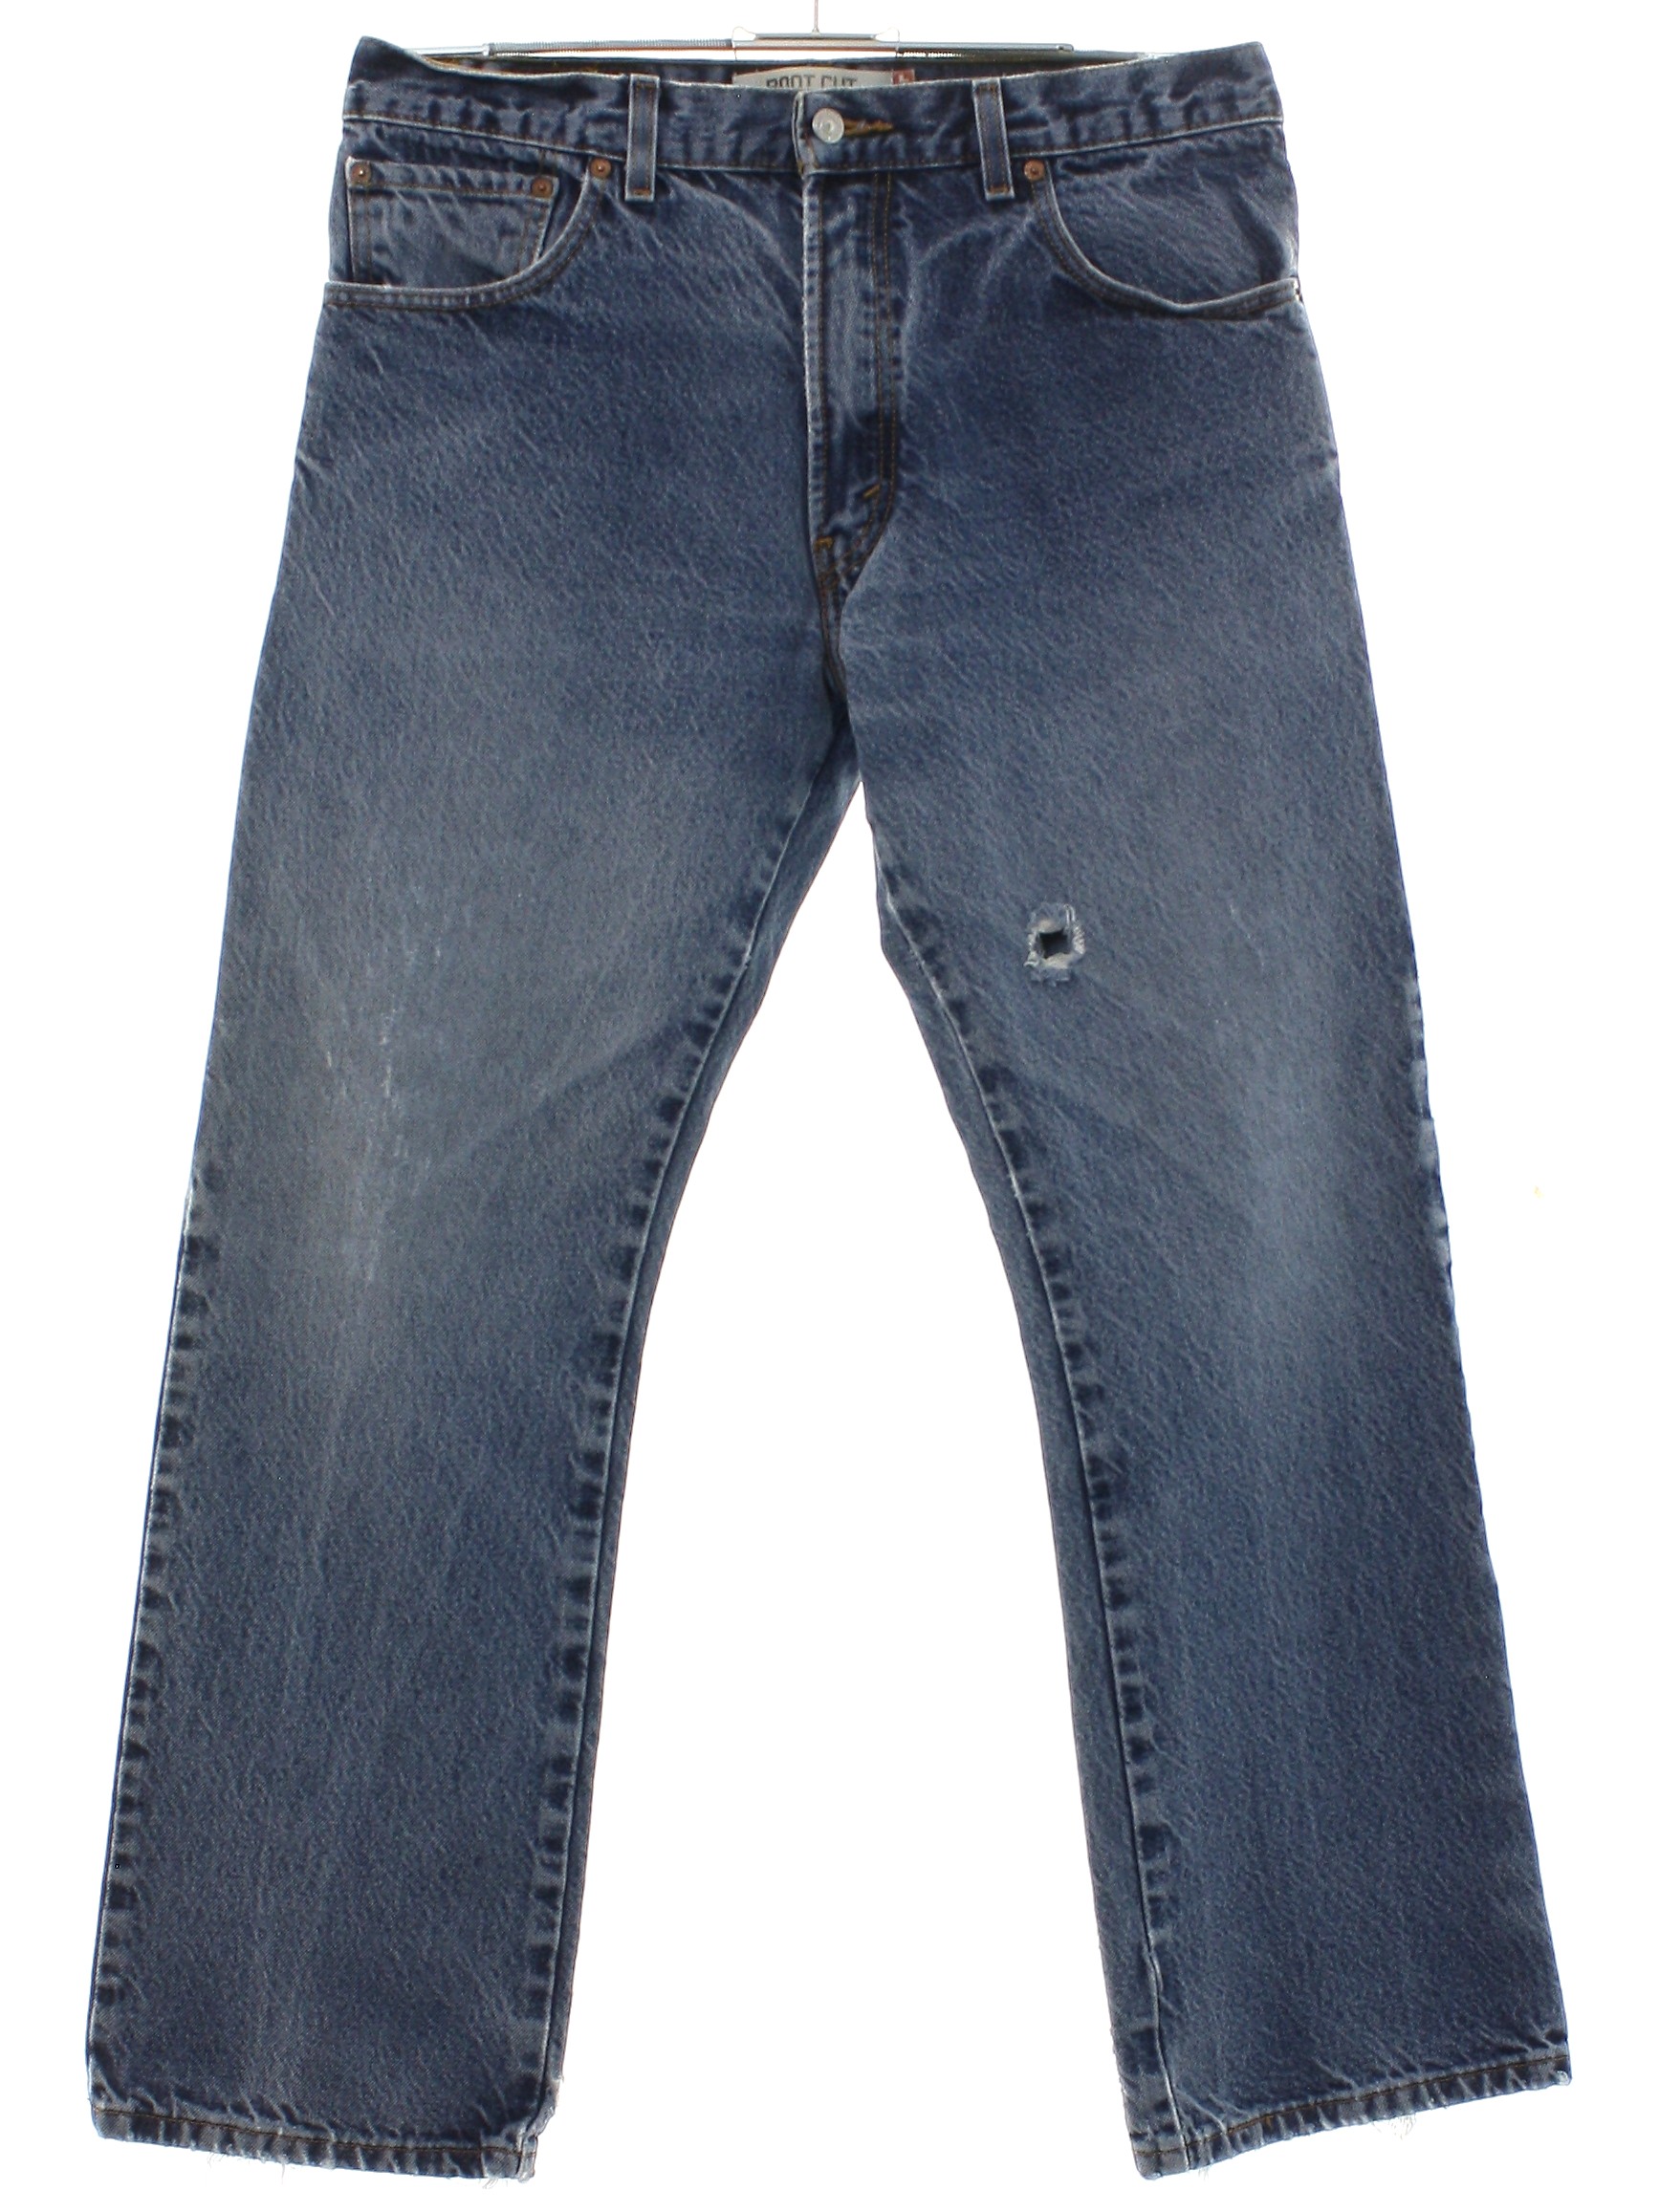 90s Retro Pants: Late 90s or Early y2k 2000s -Levis 517- Mens faded and